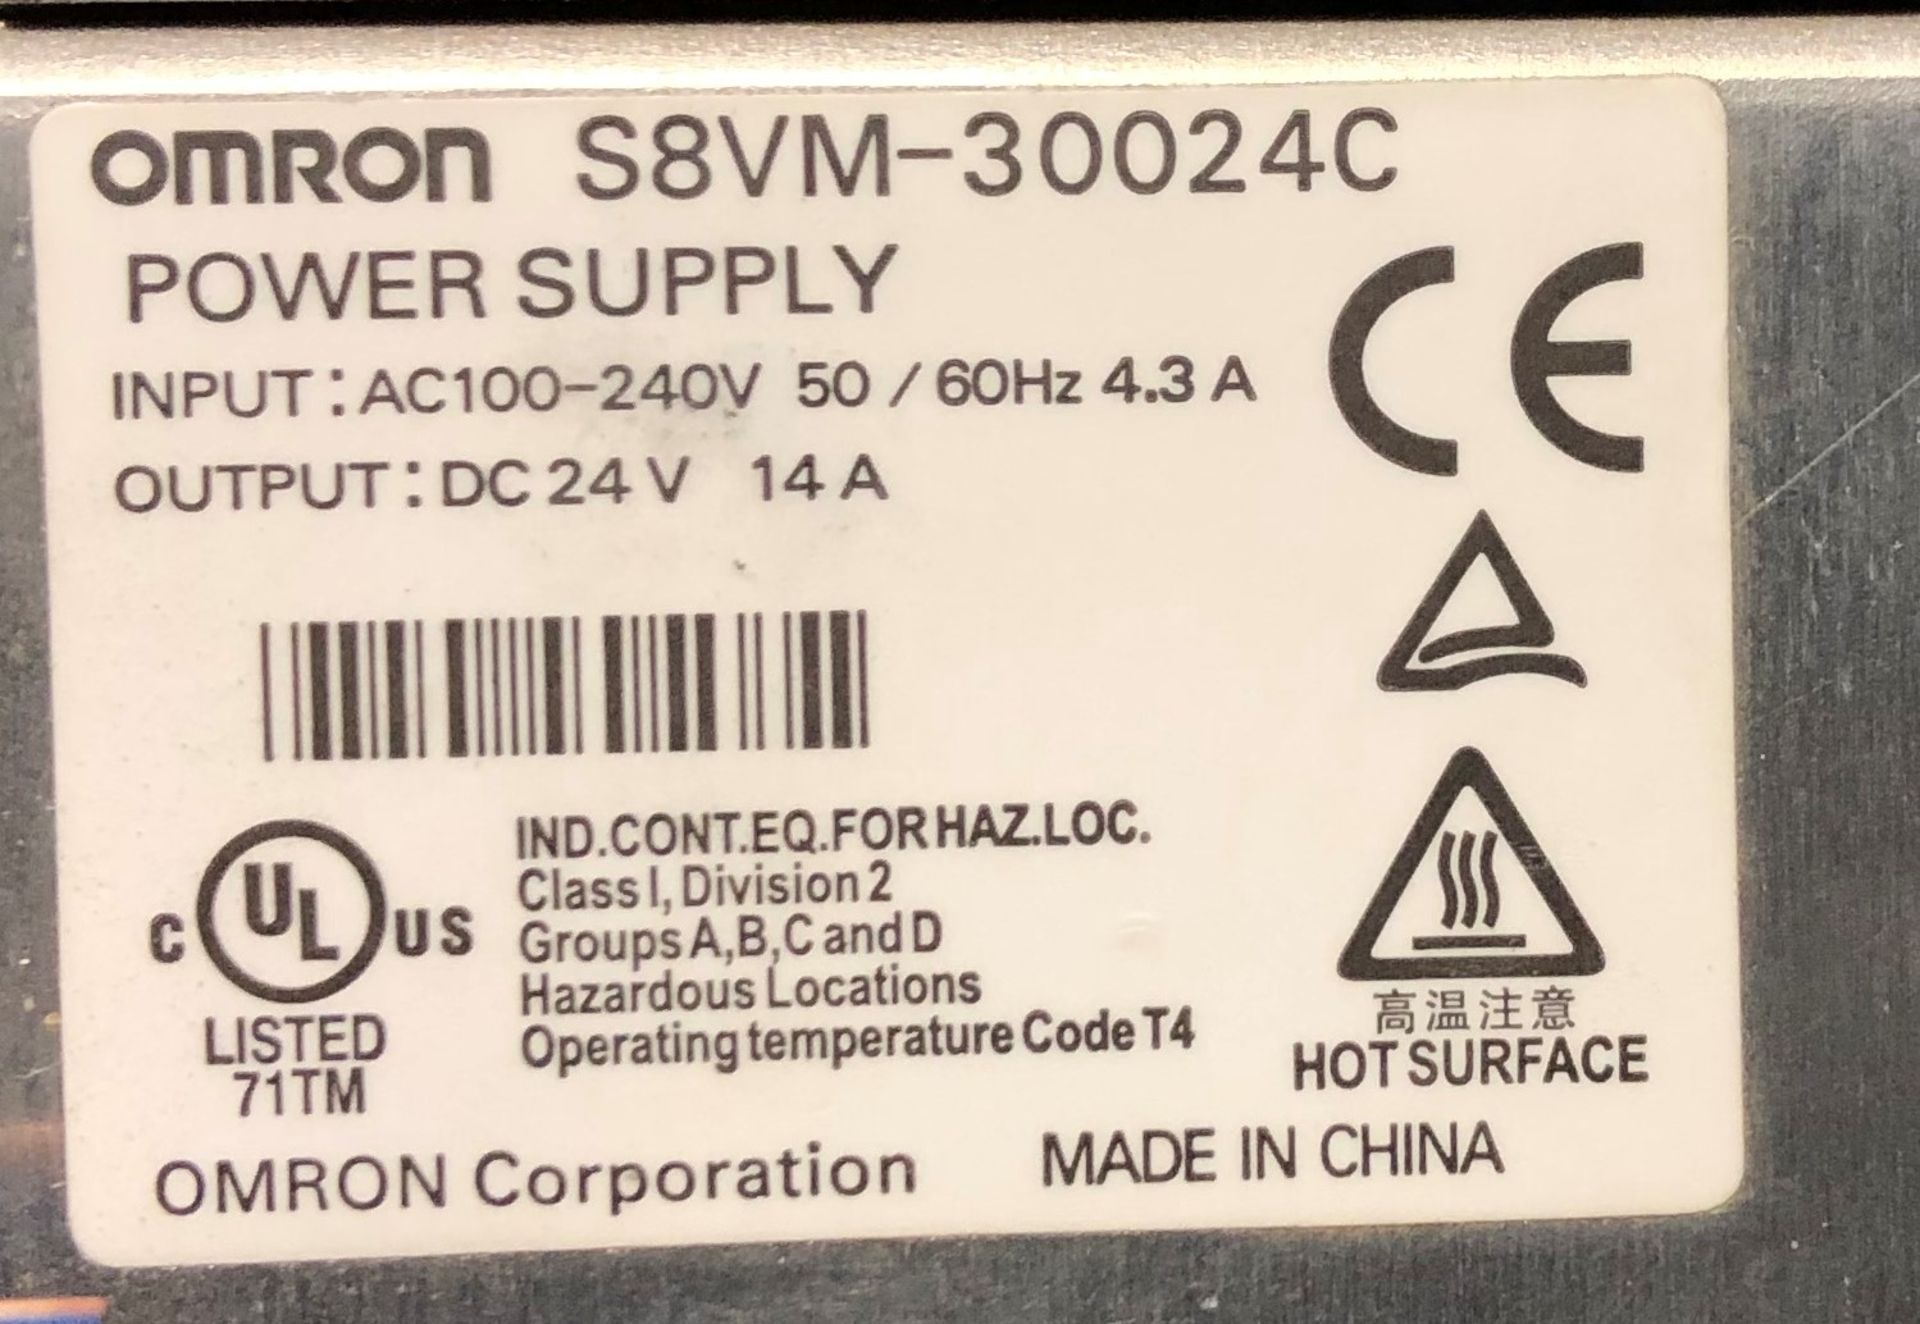 LOT OF 2 - OMRON S8VM-30024CD POWER SUPPLY INPUT: 100/240 VAC OUTPUT: 14A 24VDC, 50/60Hz - Image 6 of 6